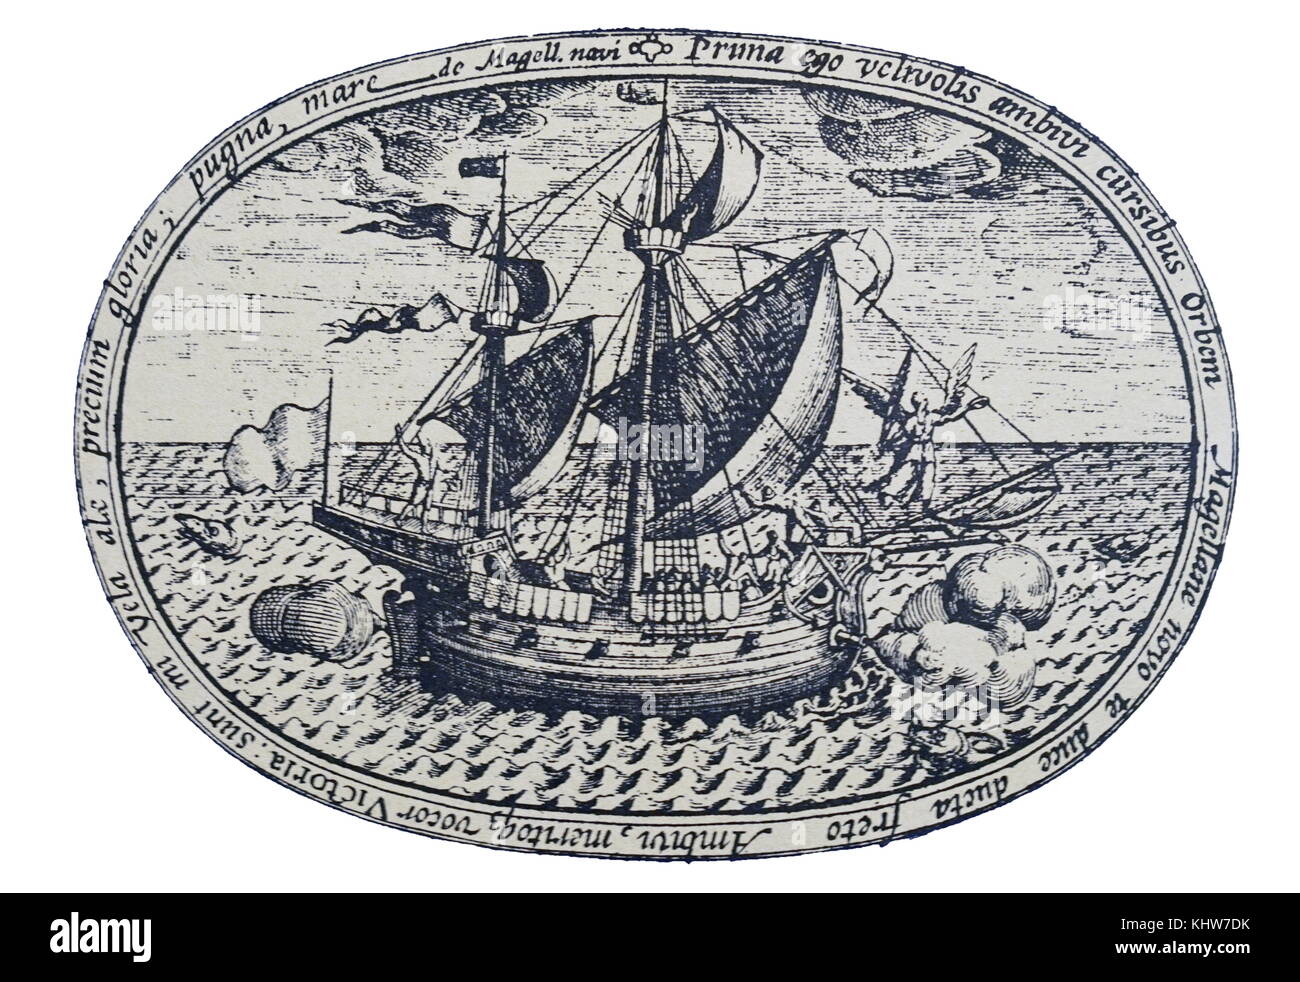 Image of MAGELLAN'S VITTORIA, 1522. The 'Vittoria,' The Only One